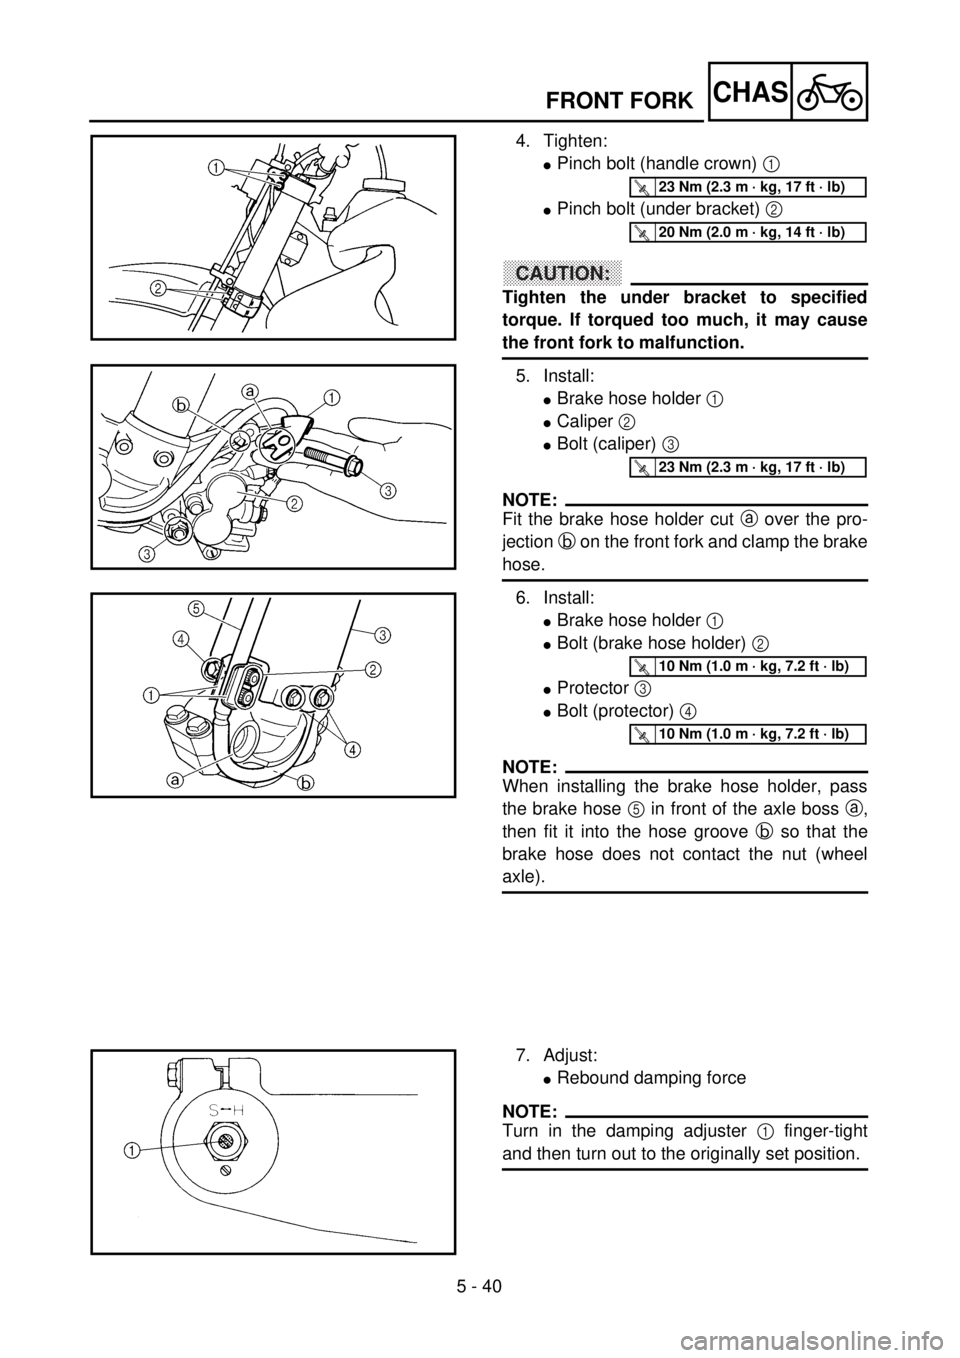 YAMAHA WR 400F 2001  Owners Manual 5 - 40
CHASFRONT FORK
4. Tighten:
lPinch bolt (handle crown) 1 
lPinch bolt (under bracket) 2 
CAUTION:
Tighten the under bracket to specified
torque. If torqued too much, it may cause
the front fork 